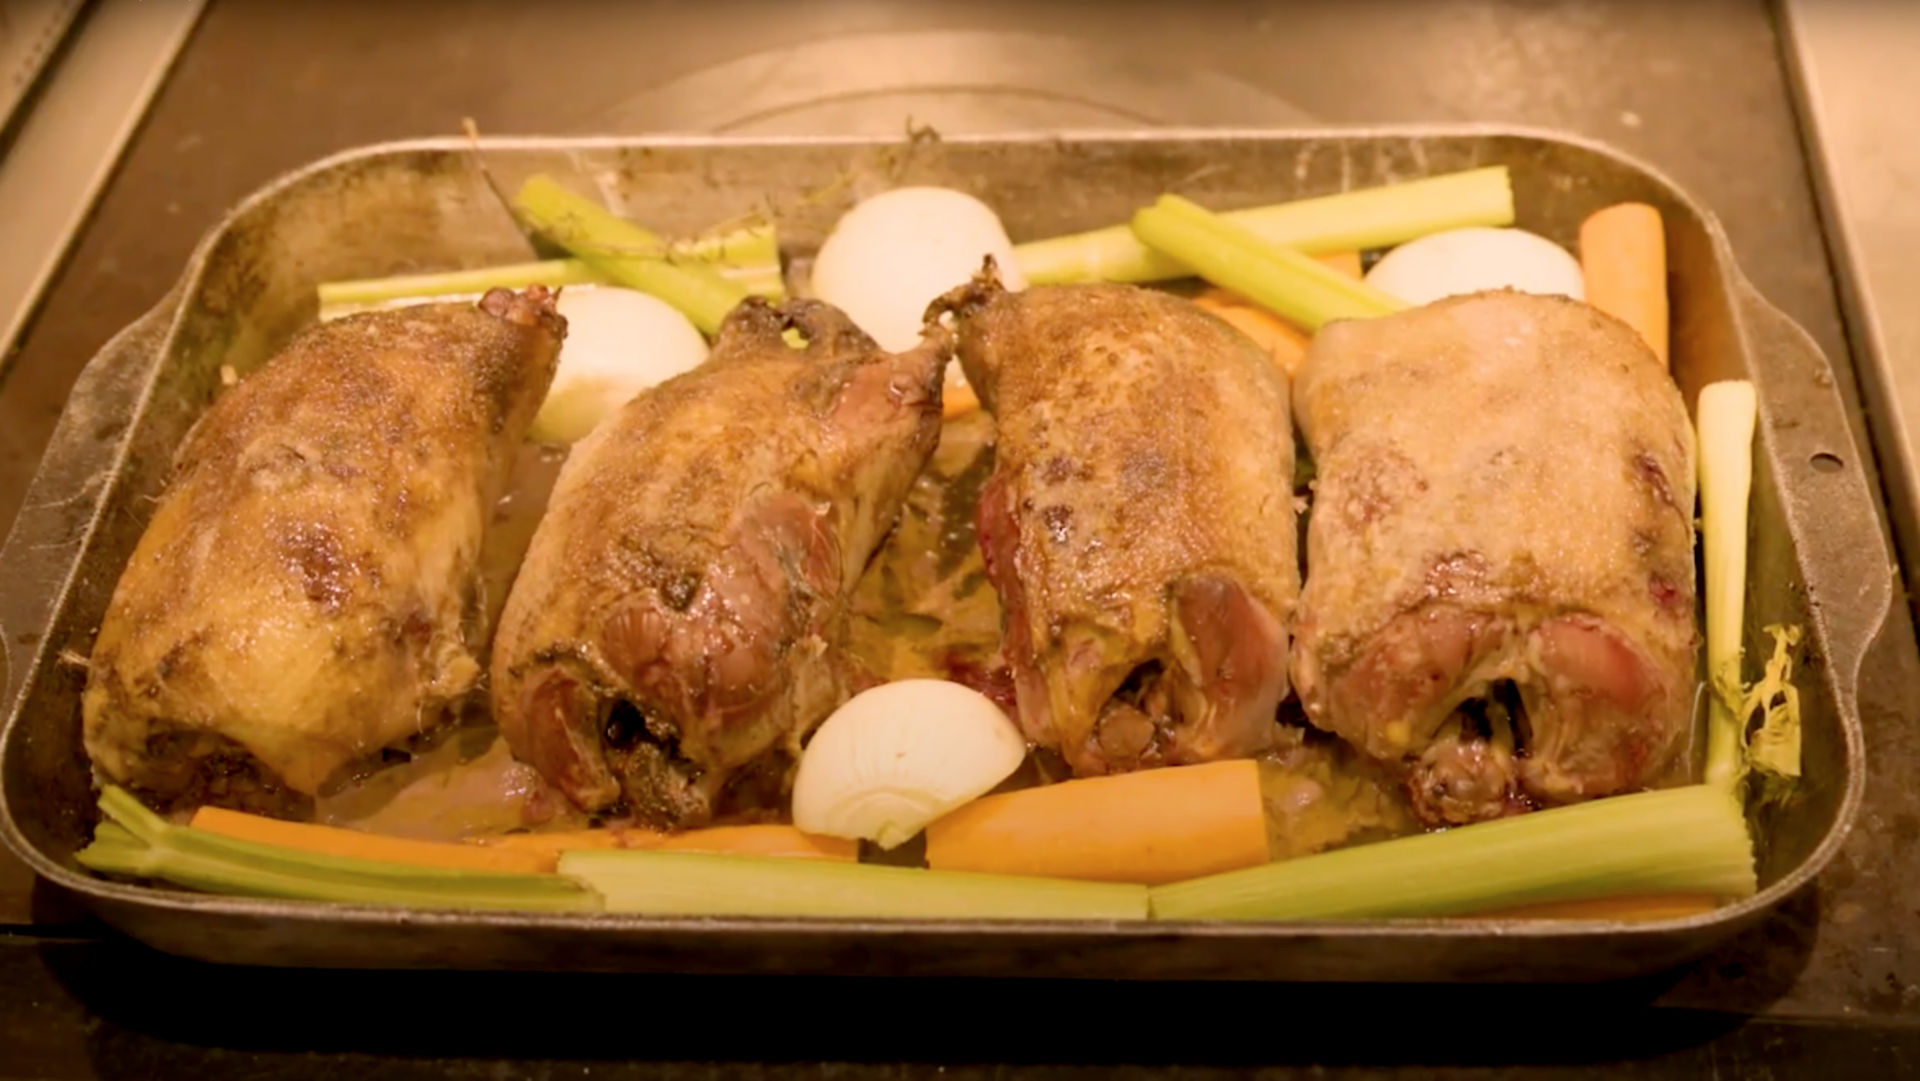 A close-up of roasted ducks in the roasting pan